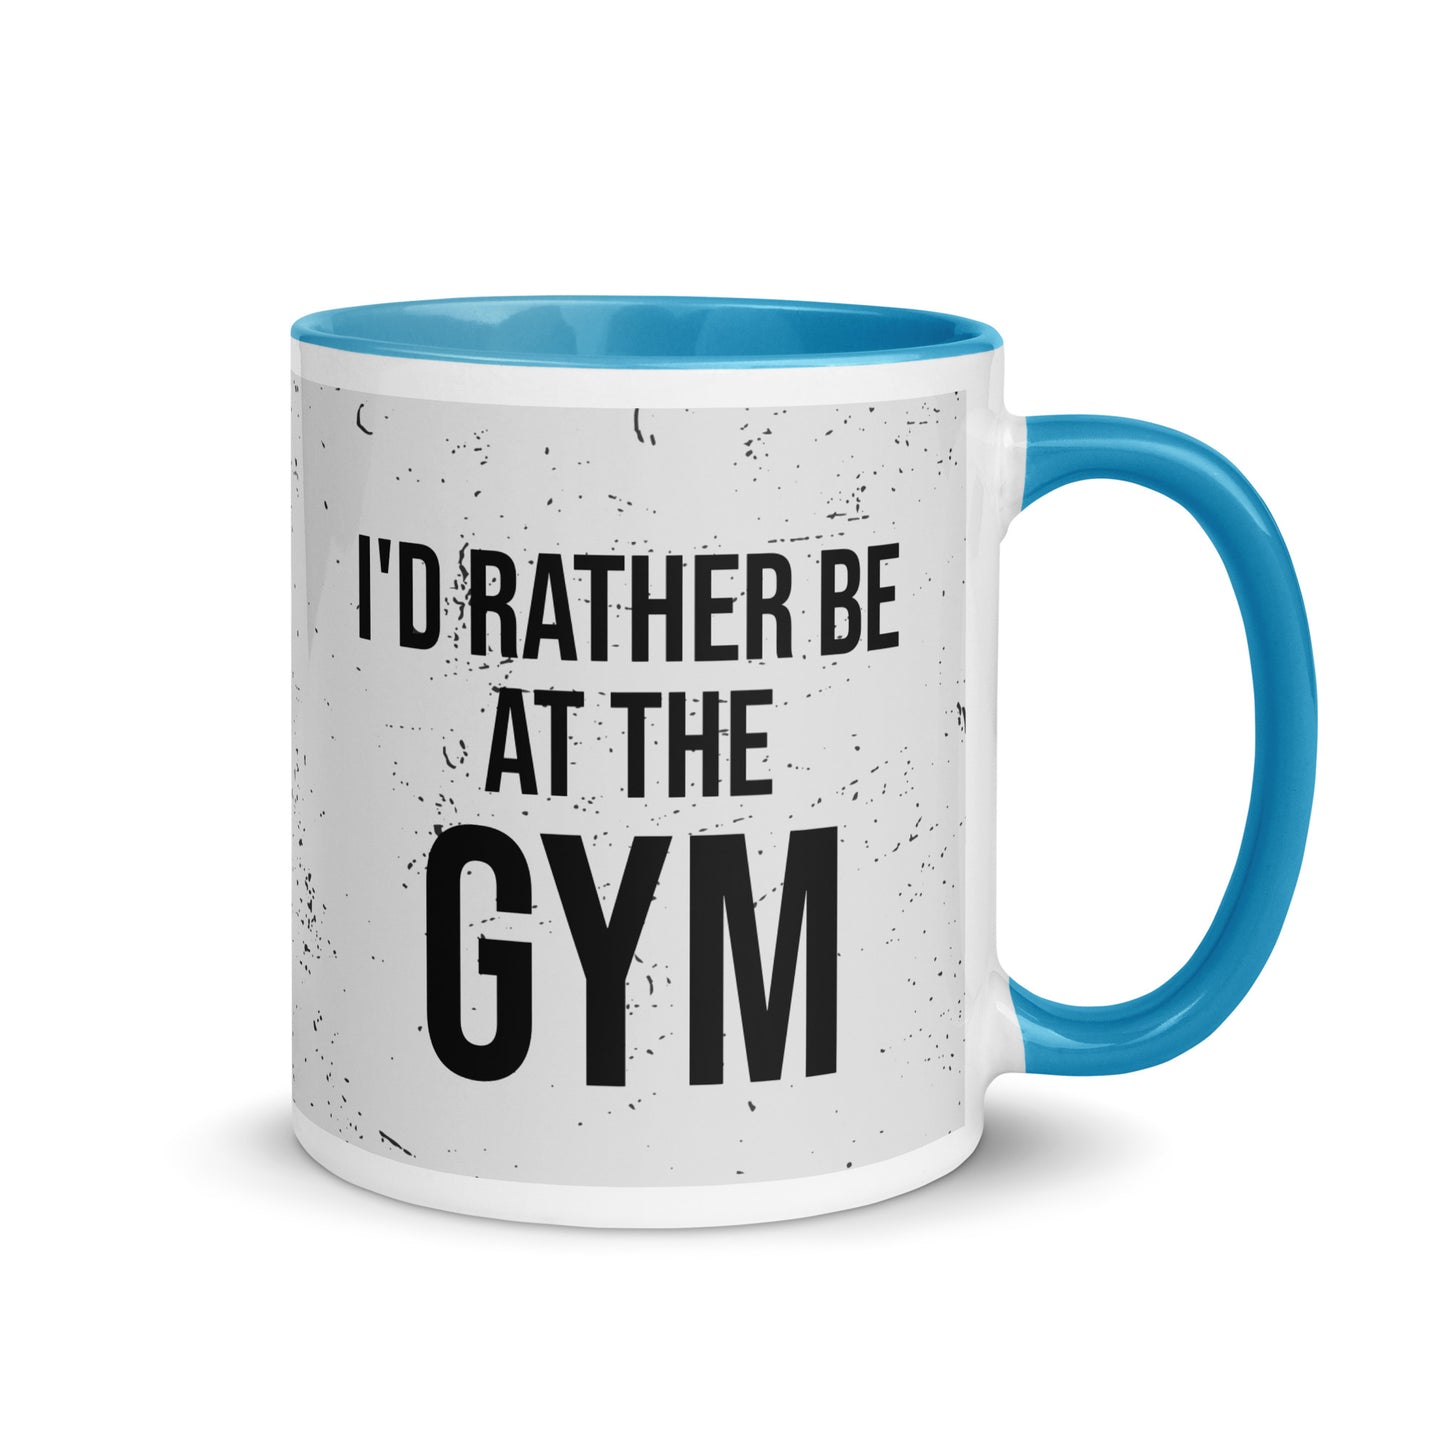 Blue handled mug with I'd rather be at the gym written on it, across a grey splatter background. A gift for someone who loves the gym.